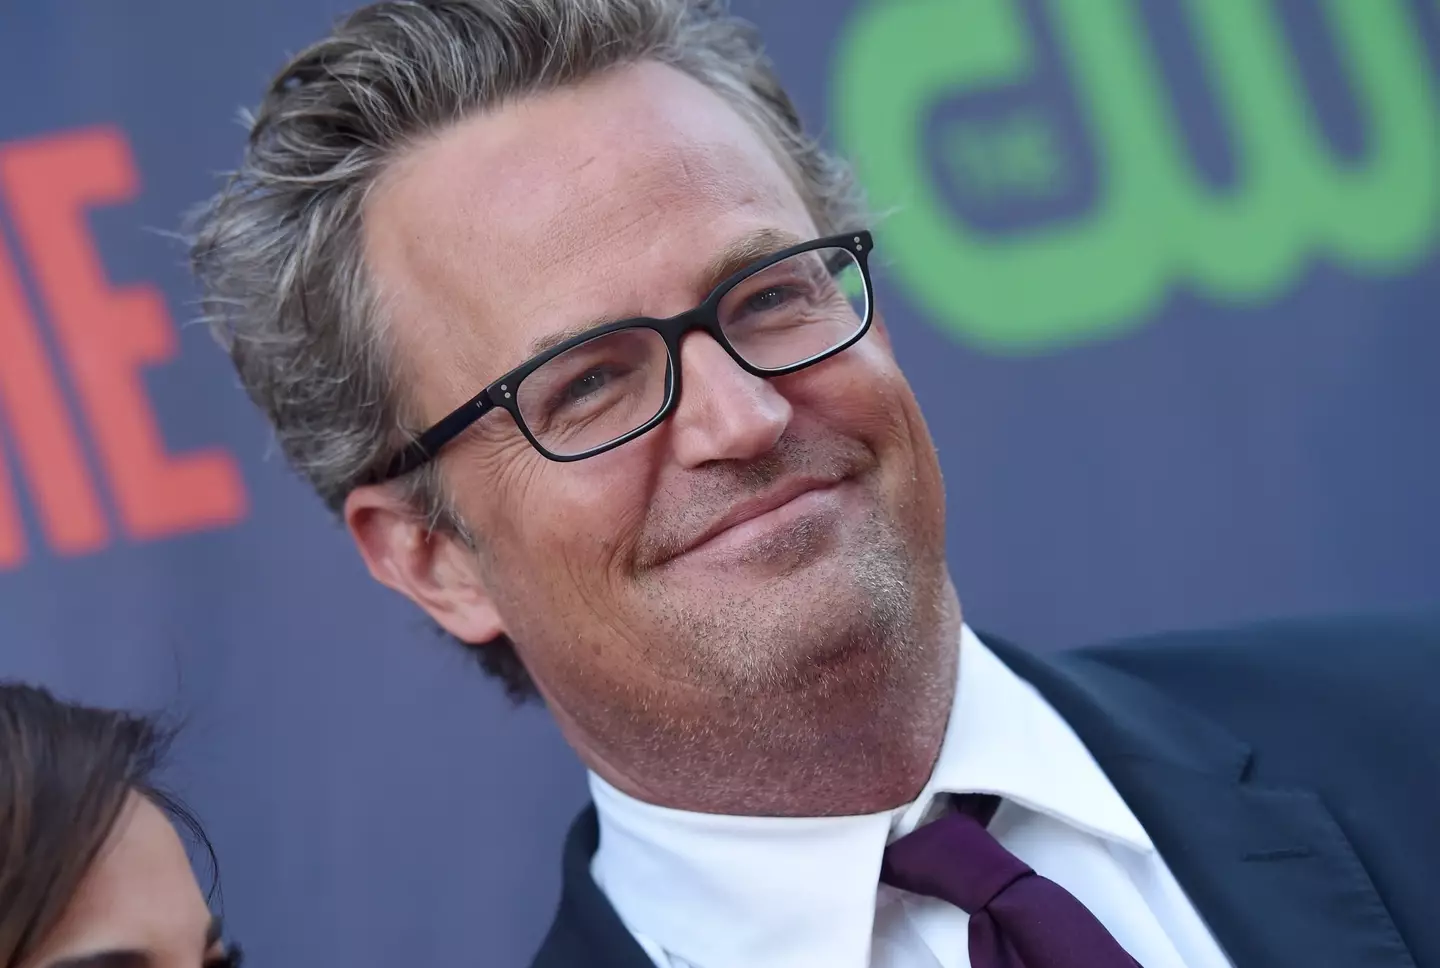 Matthew Perry previously spoke out about wanting to become a father.